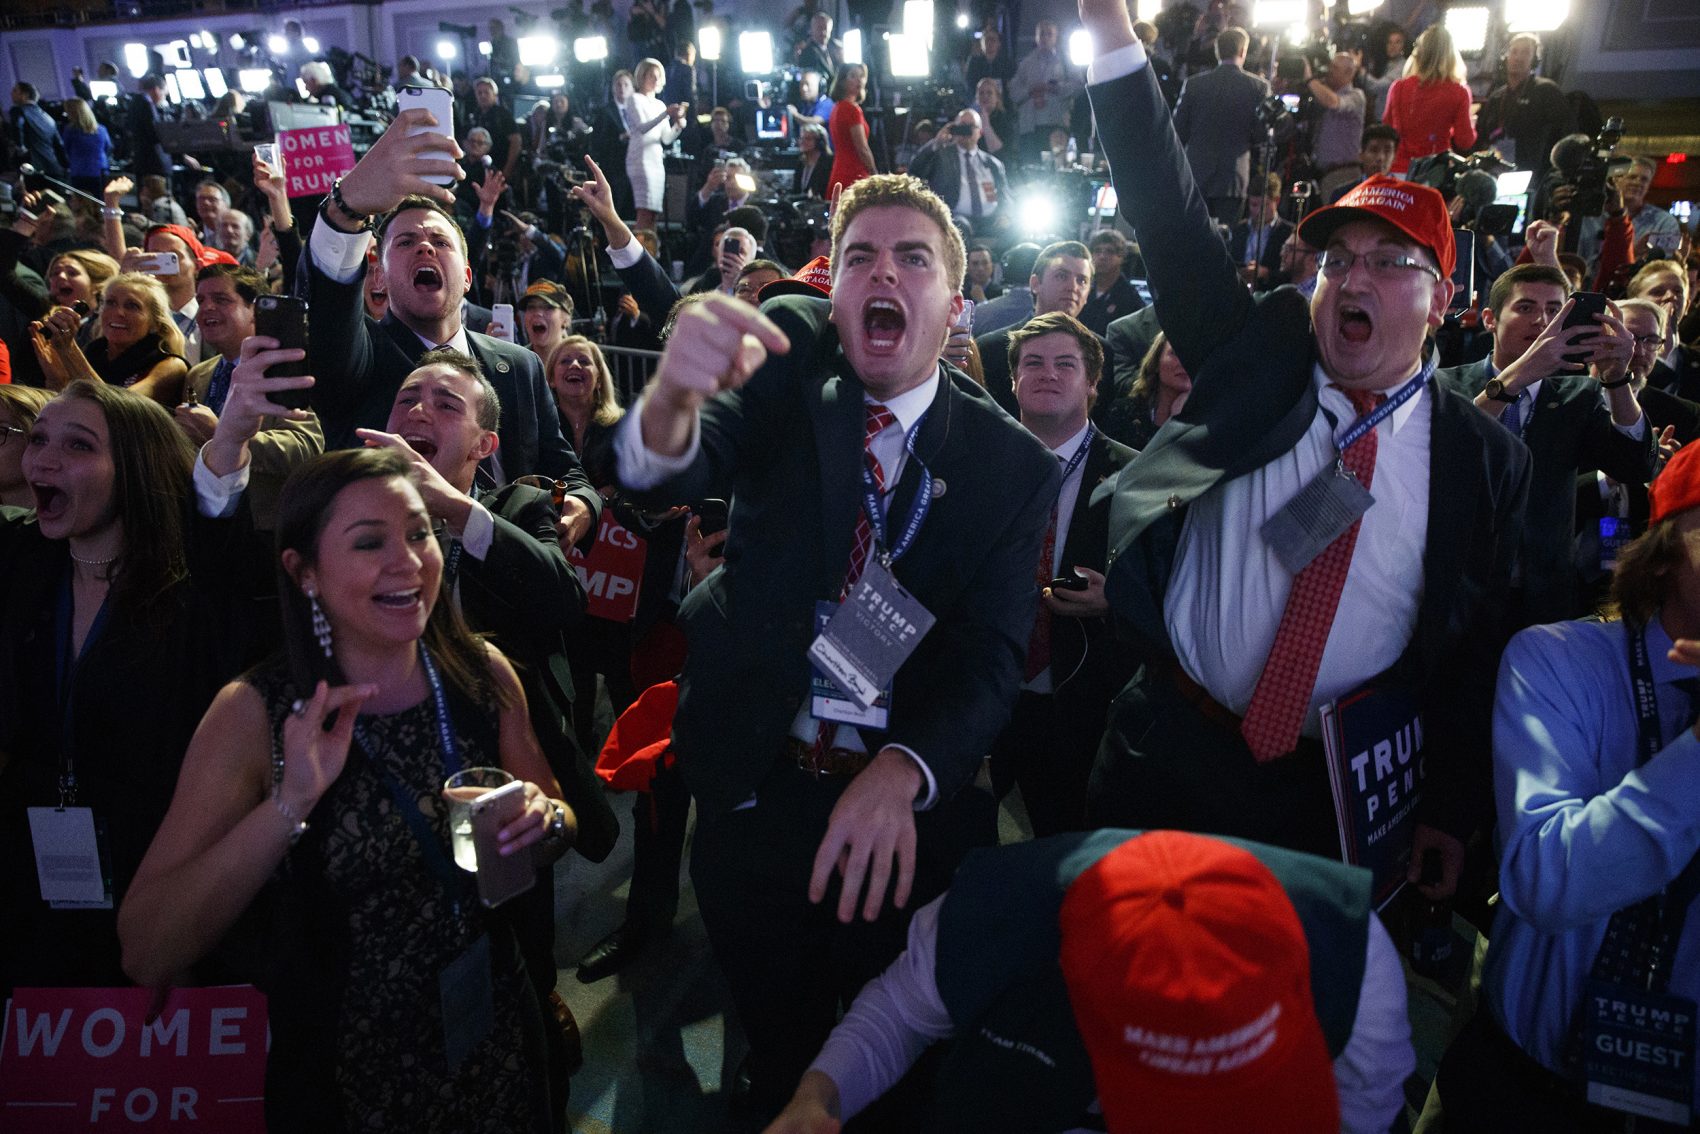 Donald Trump supporters cheer as they watch election returns Tuesday night in New York. Trump won the presidency in an upset, after a tumultuous campaign. (Evan Vucci/AP)